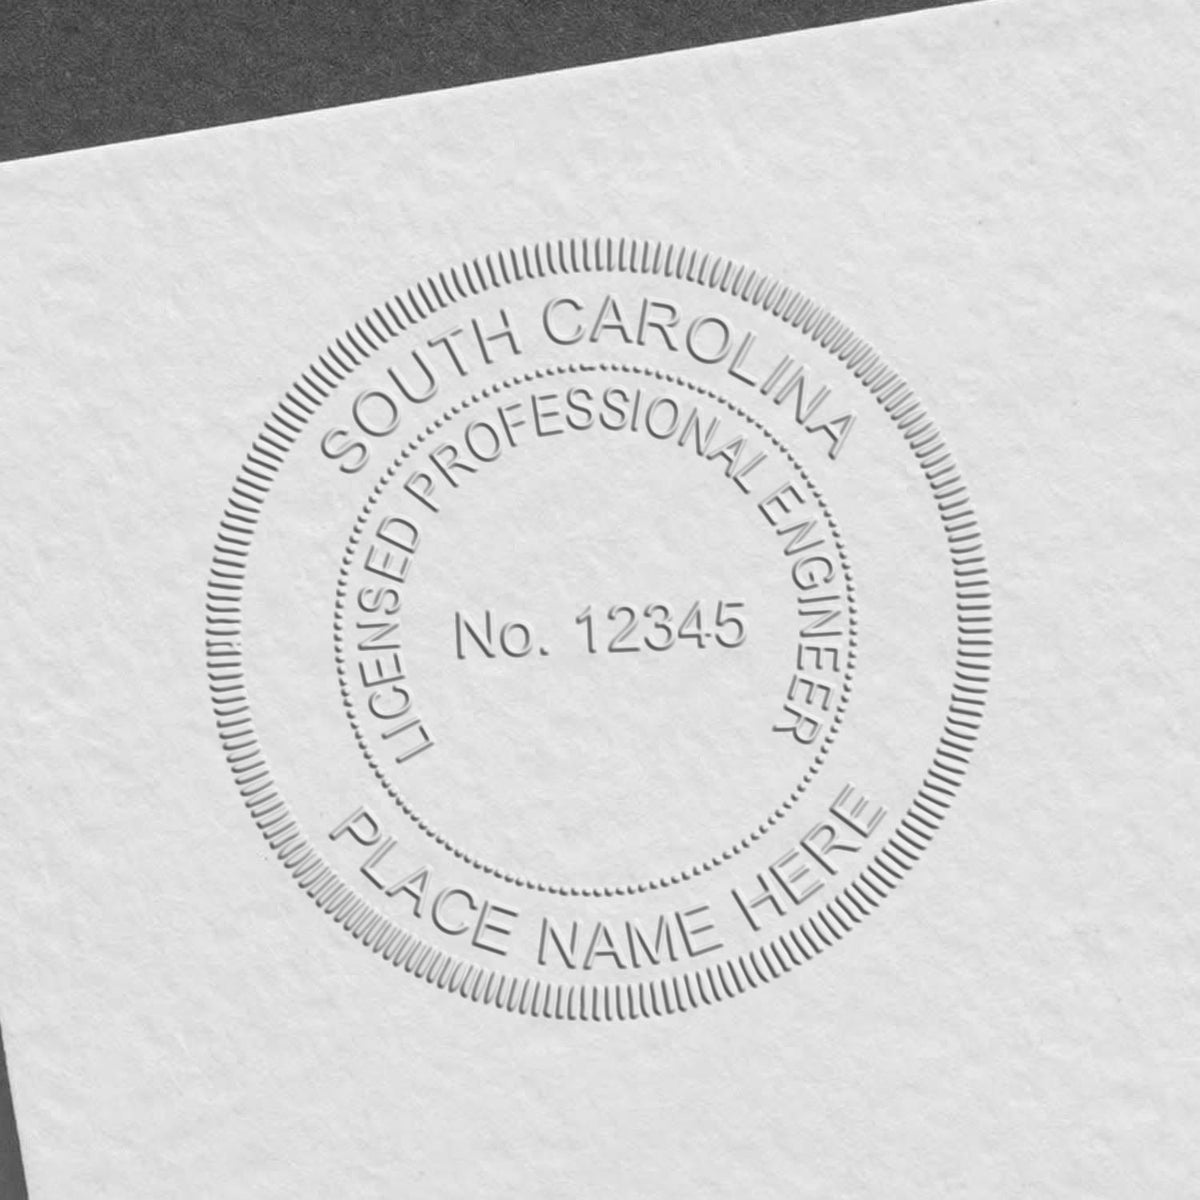 The State of South Carolina Extended Long Reach Engineer Seal stamp impression comes to life with a crisp, detailed photo on paper - showcasing true professional quality.